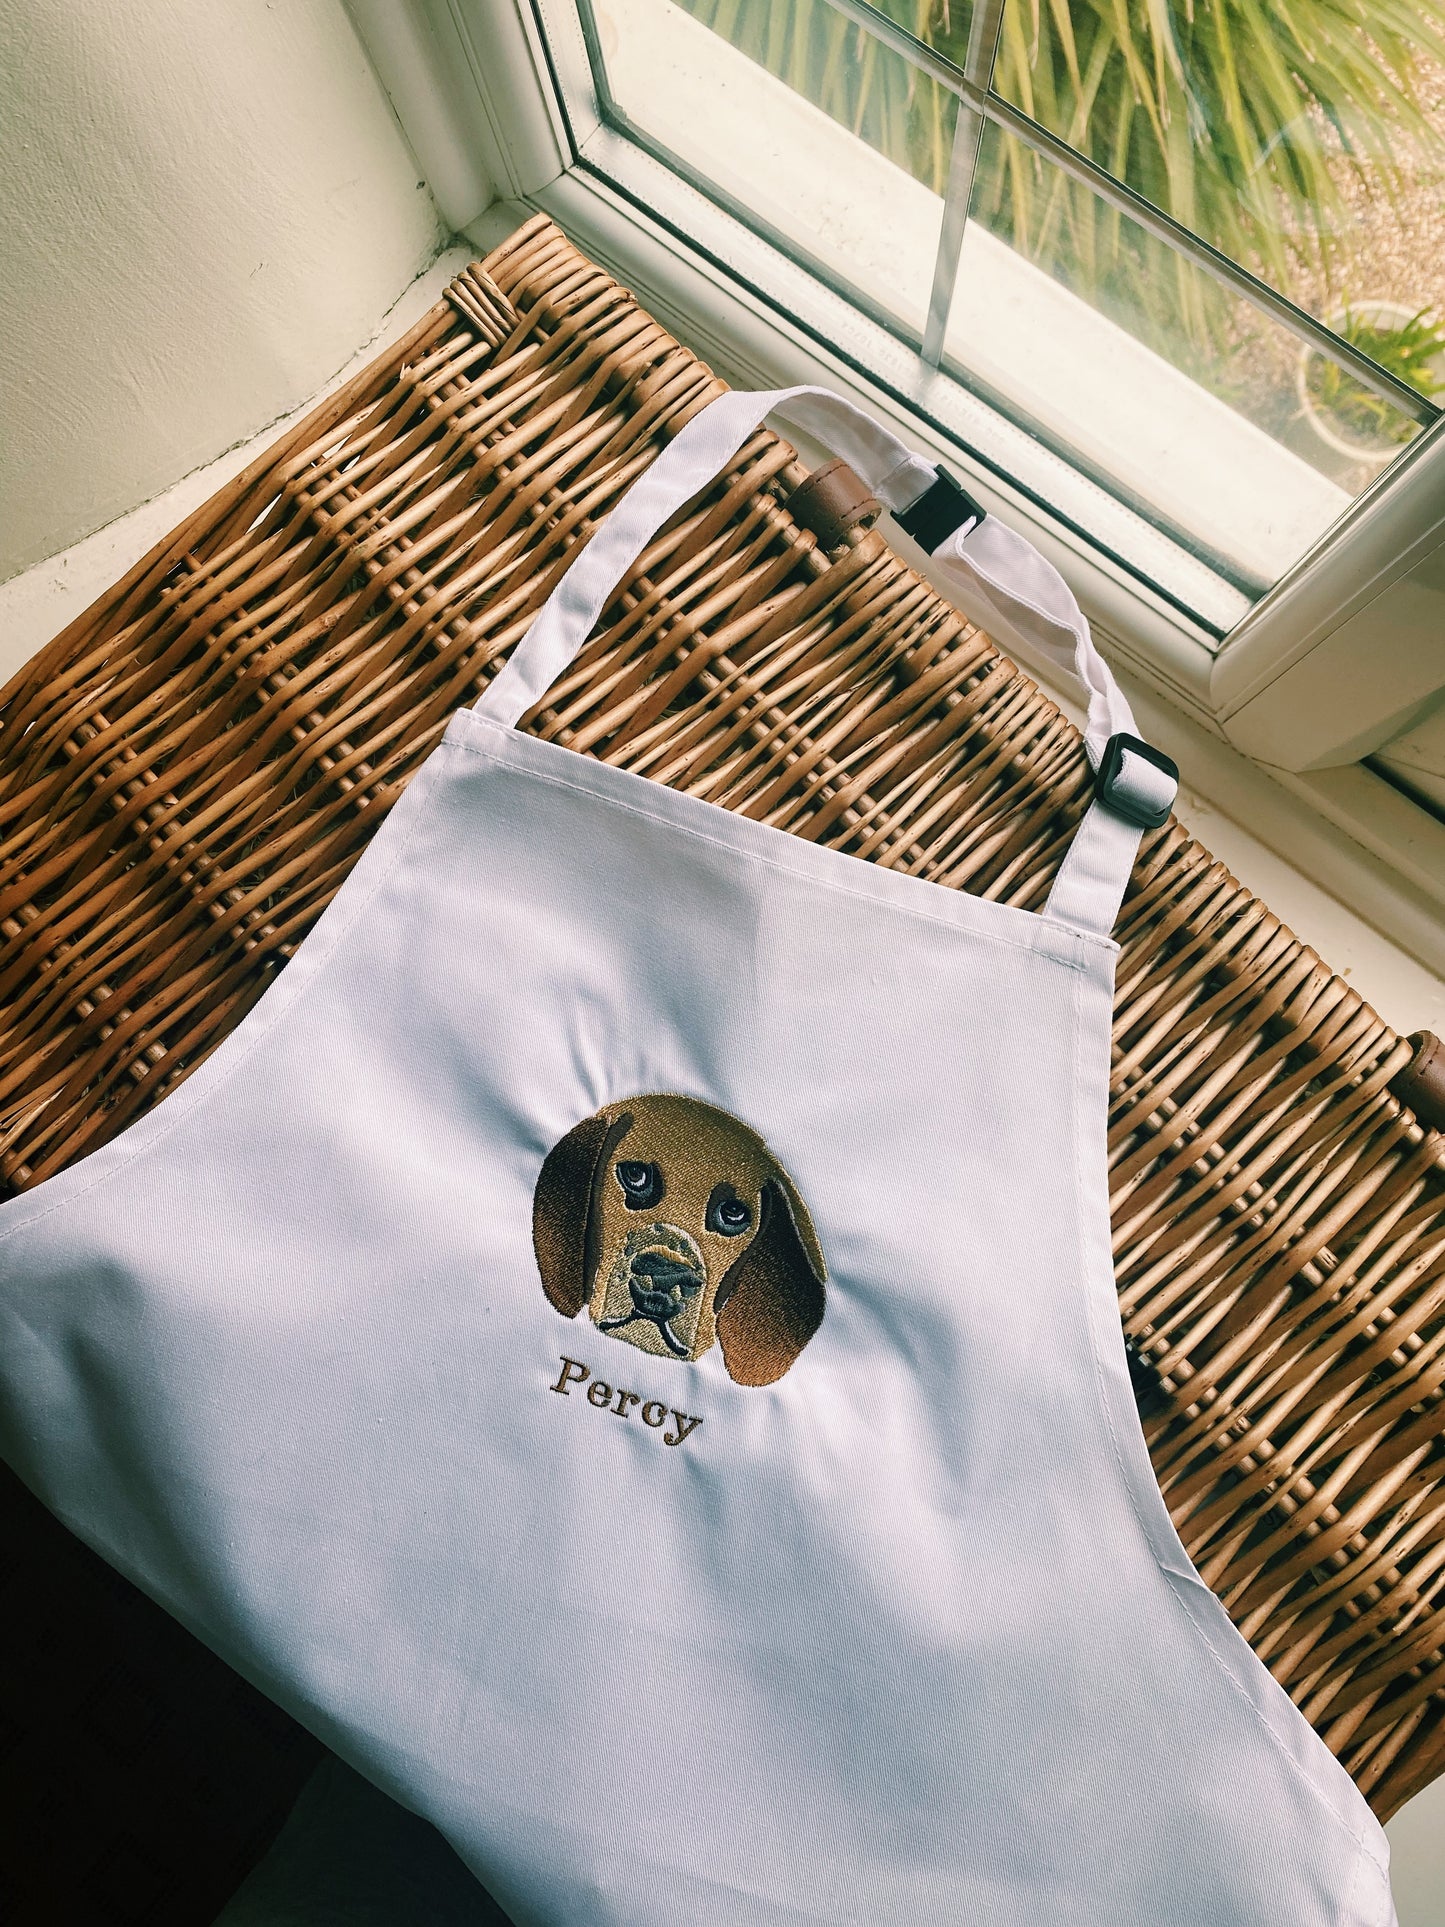 Children's Apron | Embroidered | Pet Photo | Your Upload